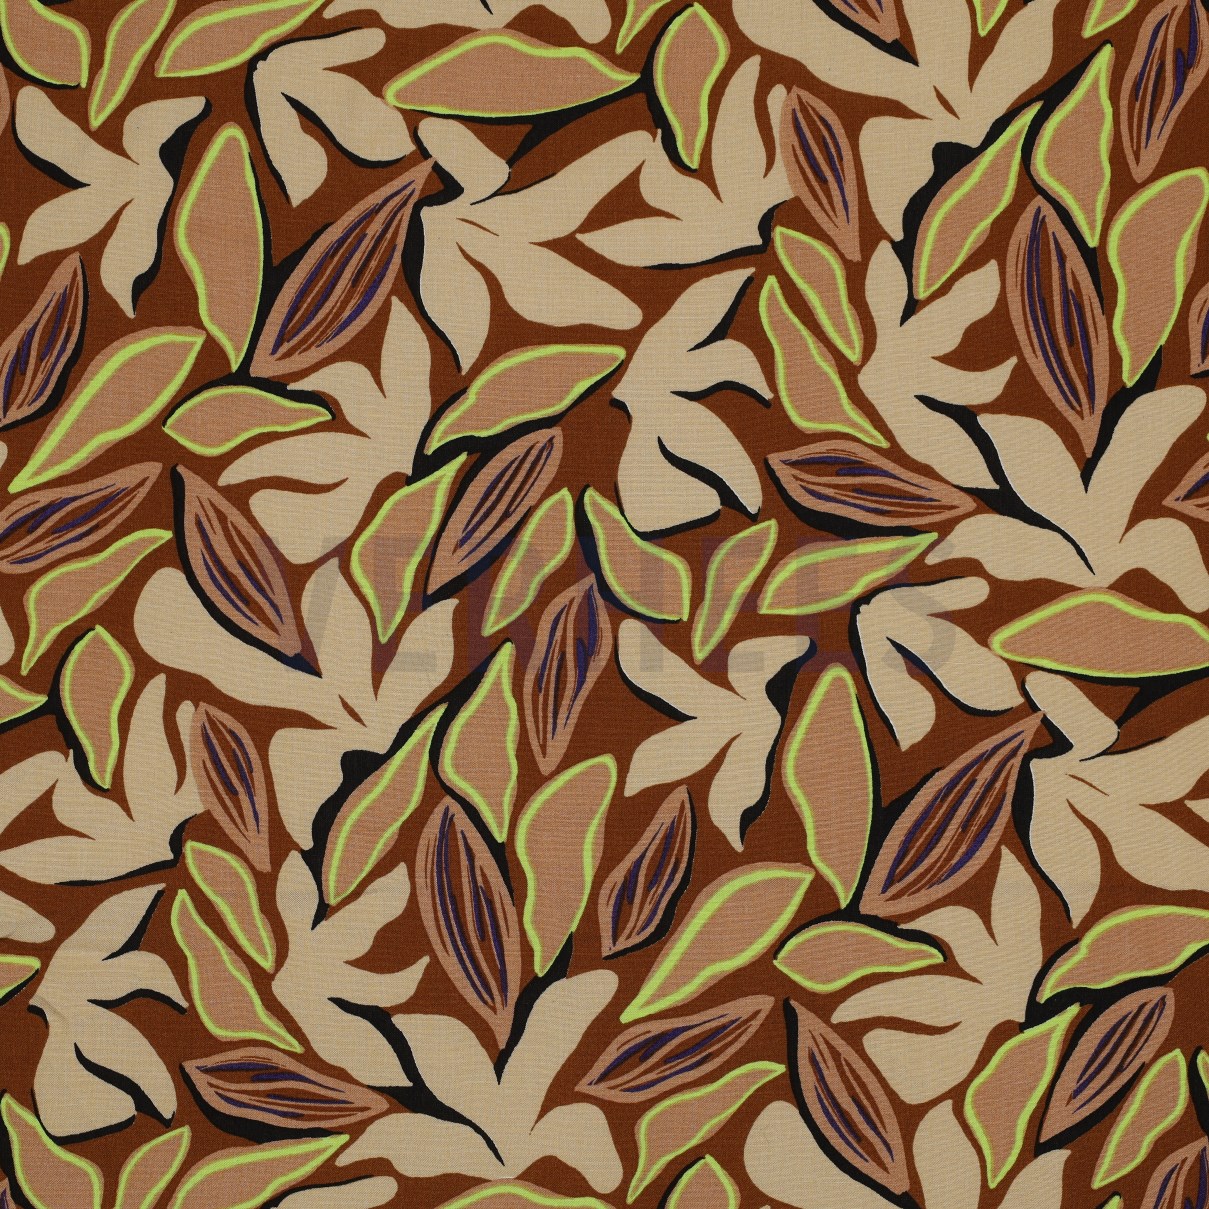 RADIANCE ABSTRACT BROWN (high resolution)